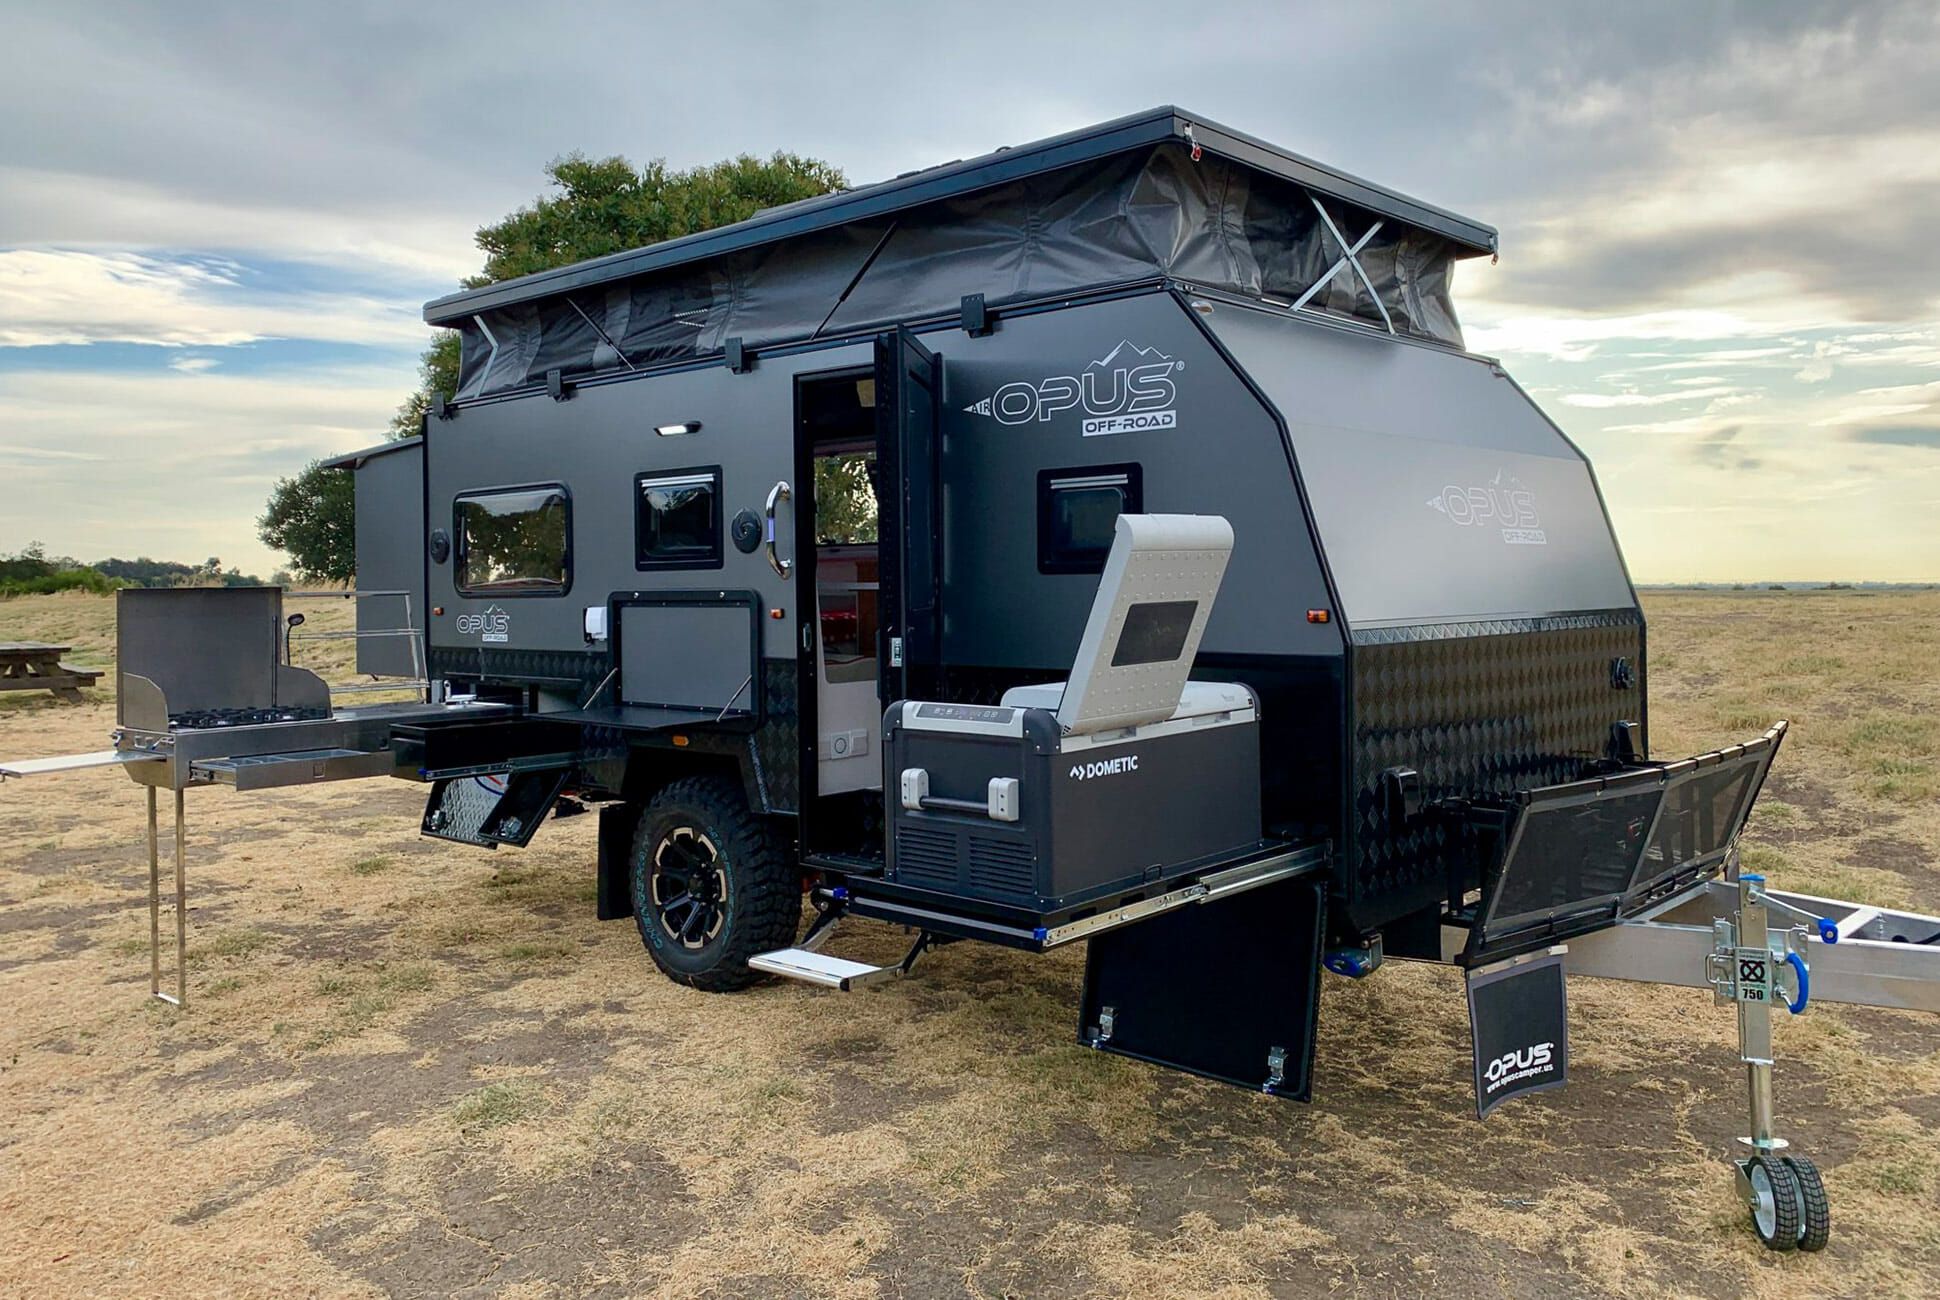 The Best Off Road Camping Trailers You Can Buy In 2020,How Much Do You Tip Movers 2020